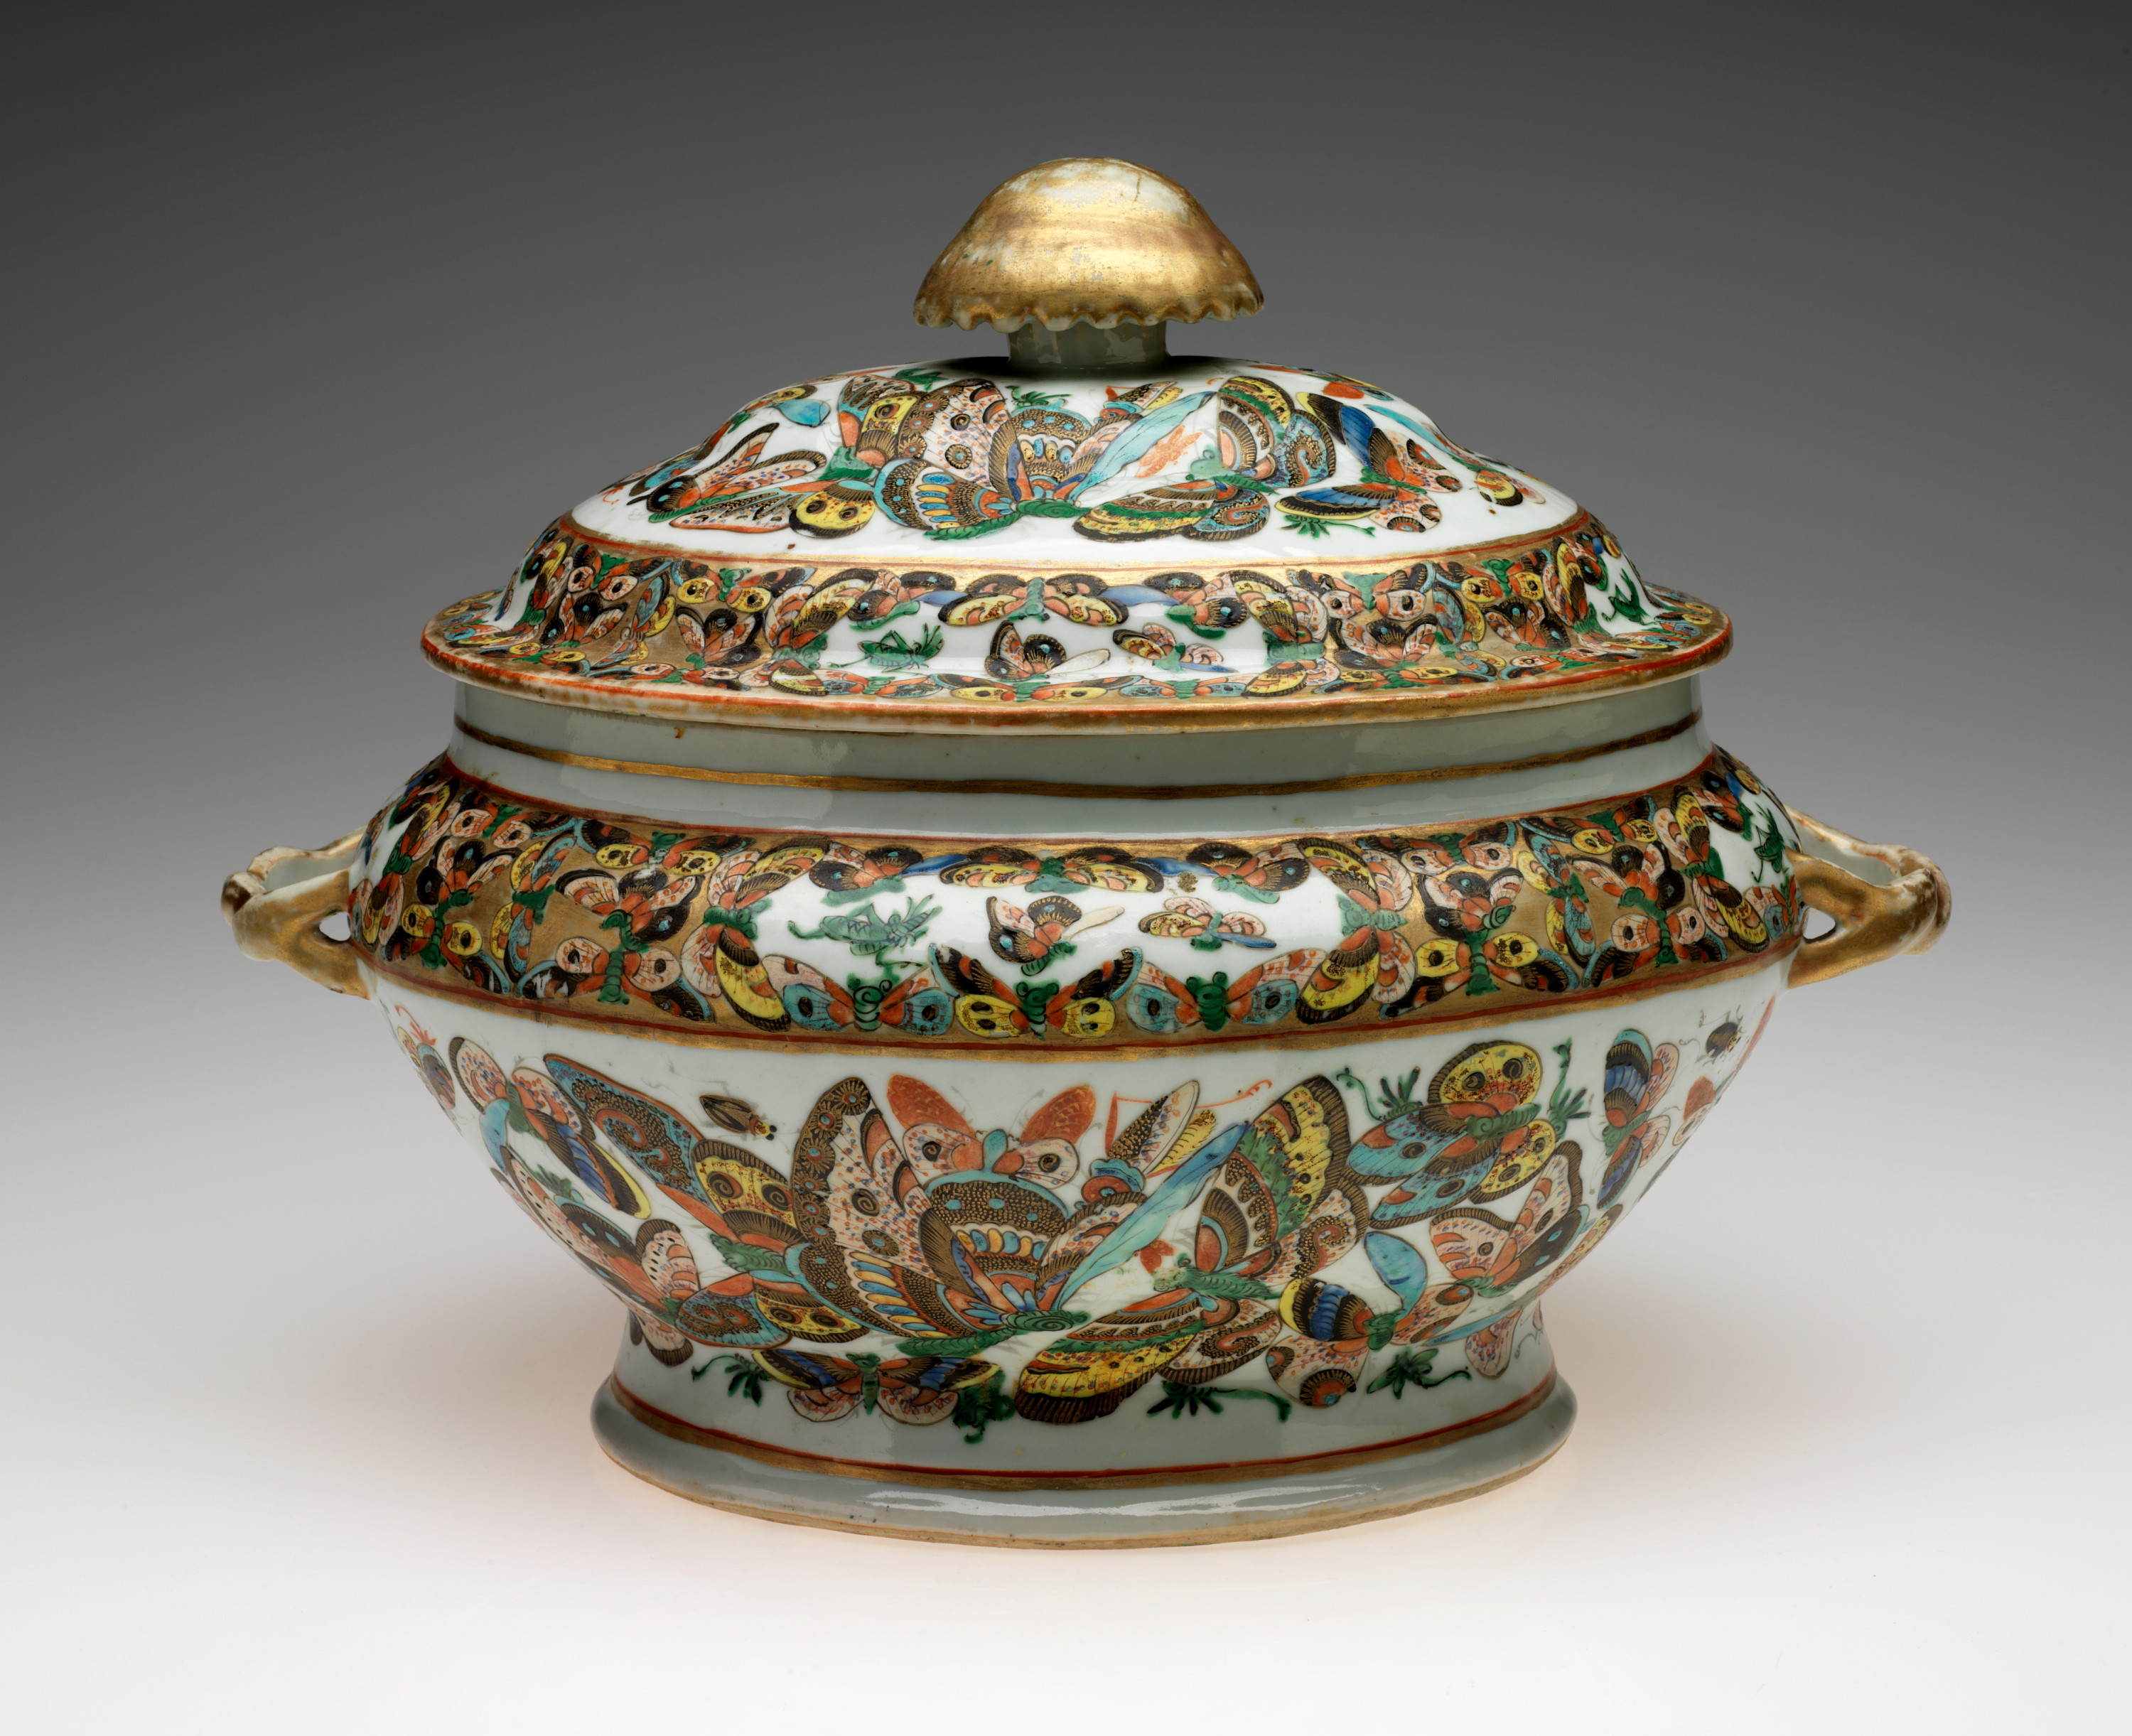 /An%20oval%20lidded%20vessel%20with%20a%20large%20gold%20finial.%20The%20body%20of%20the%20vessel%20is%20decorated%20with%20multicolored%20butterflies%20on%20a%20white%20ground.%20